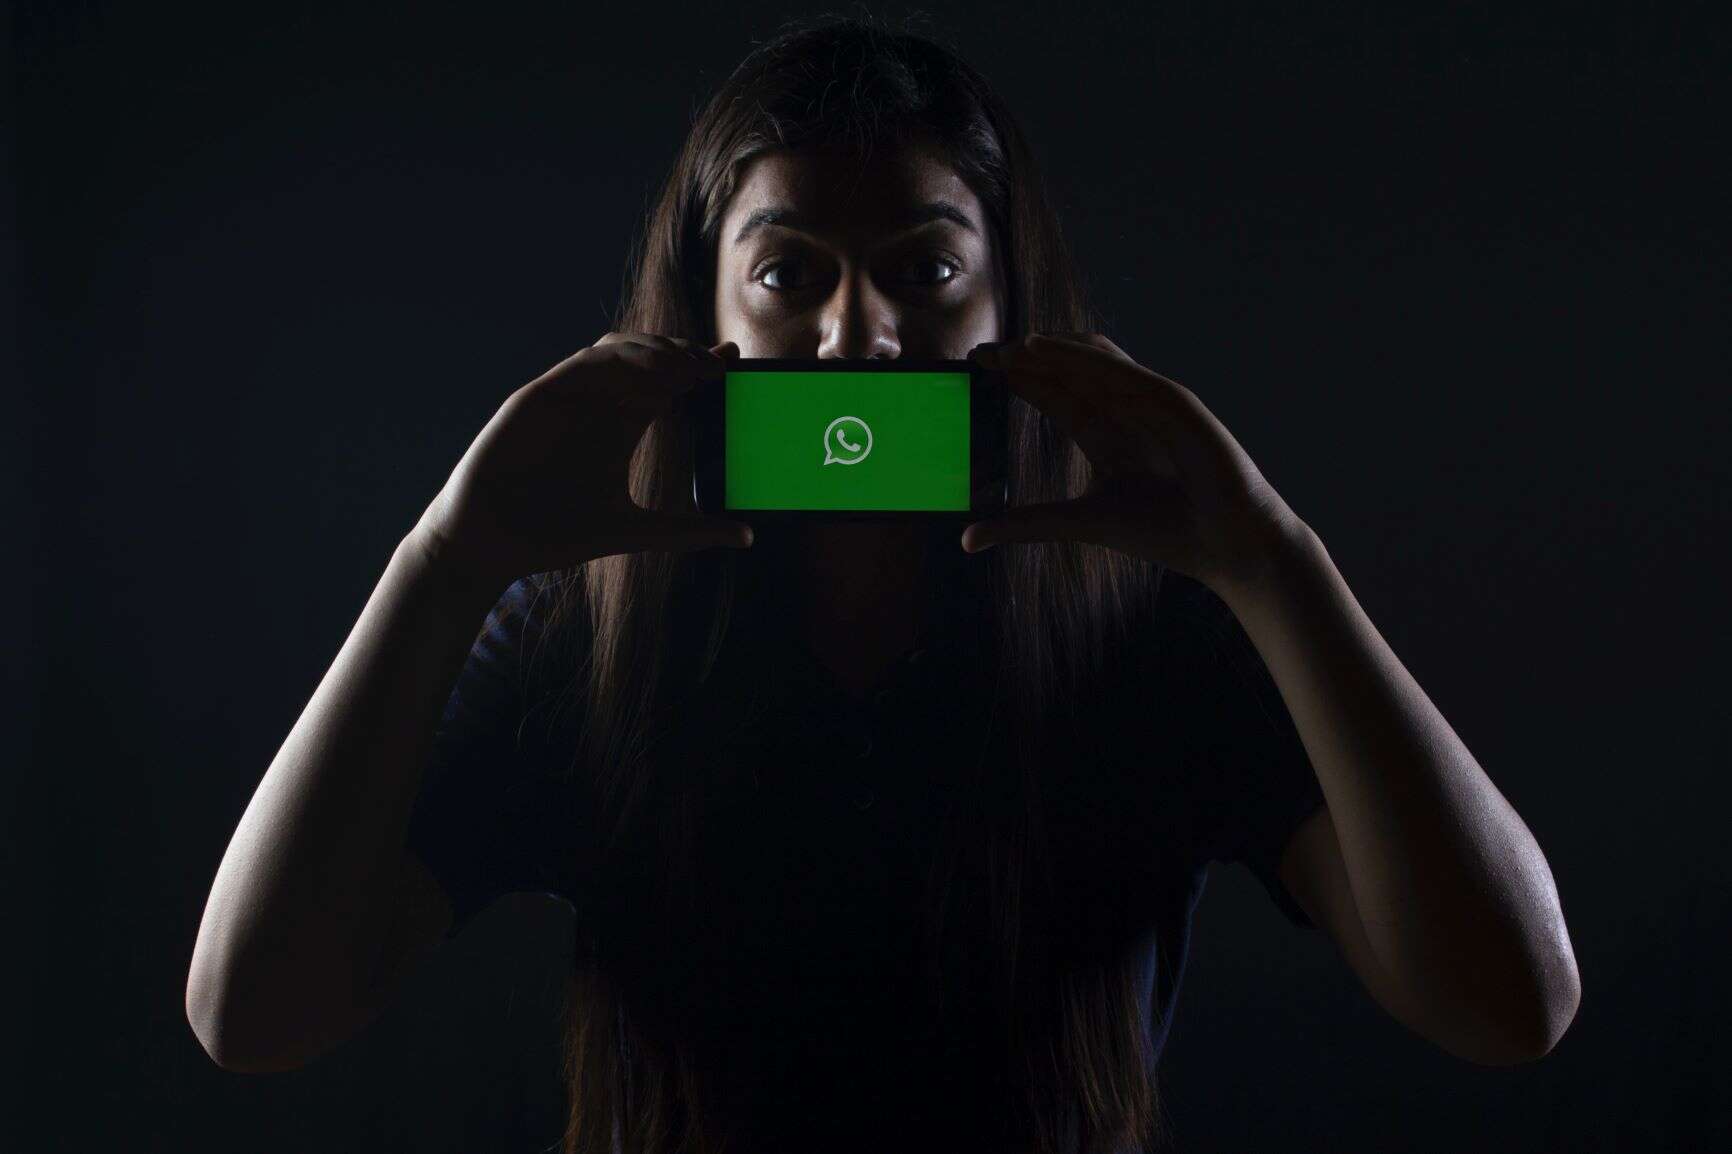 WhatsApp's privacy policy could cause legal headaches for employers